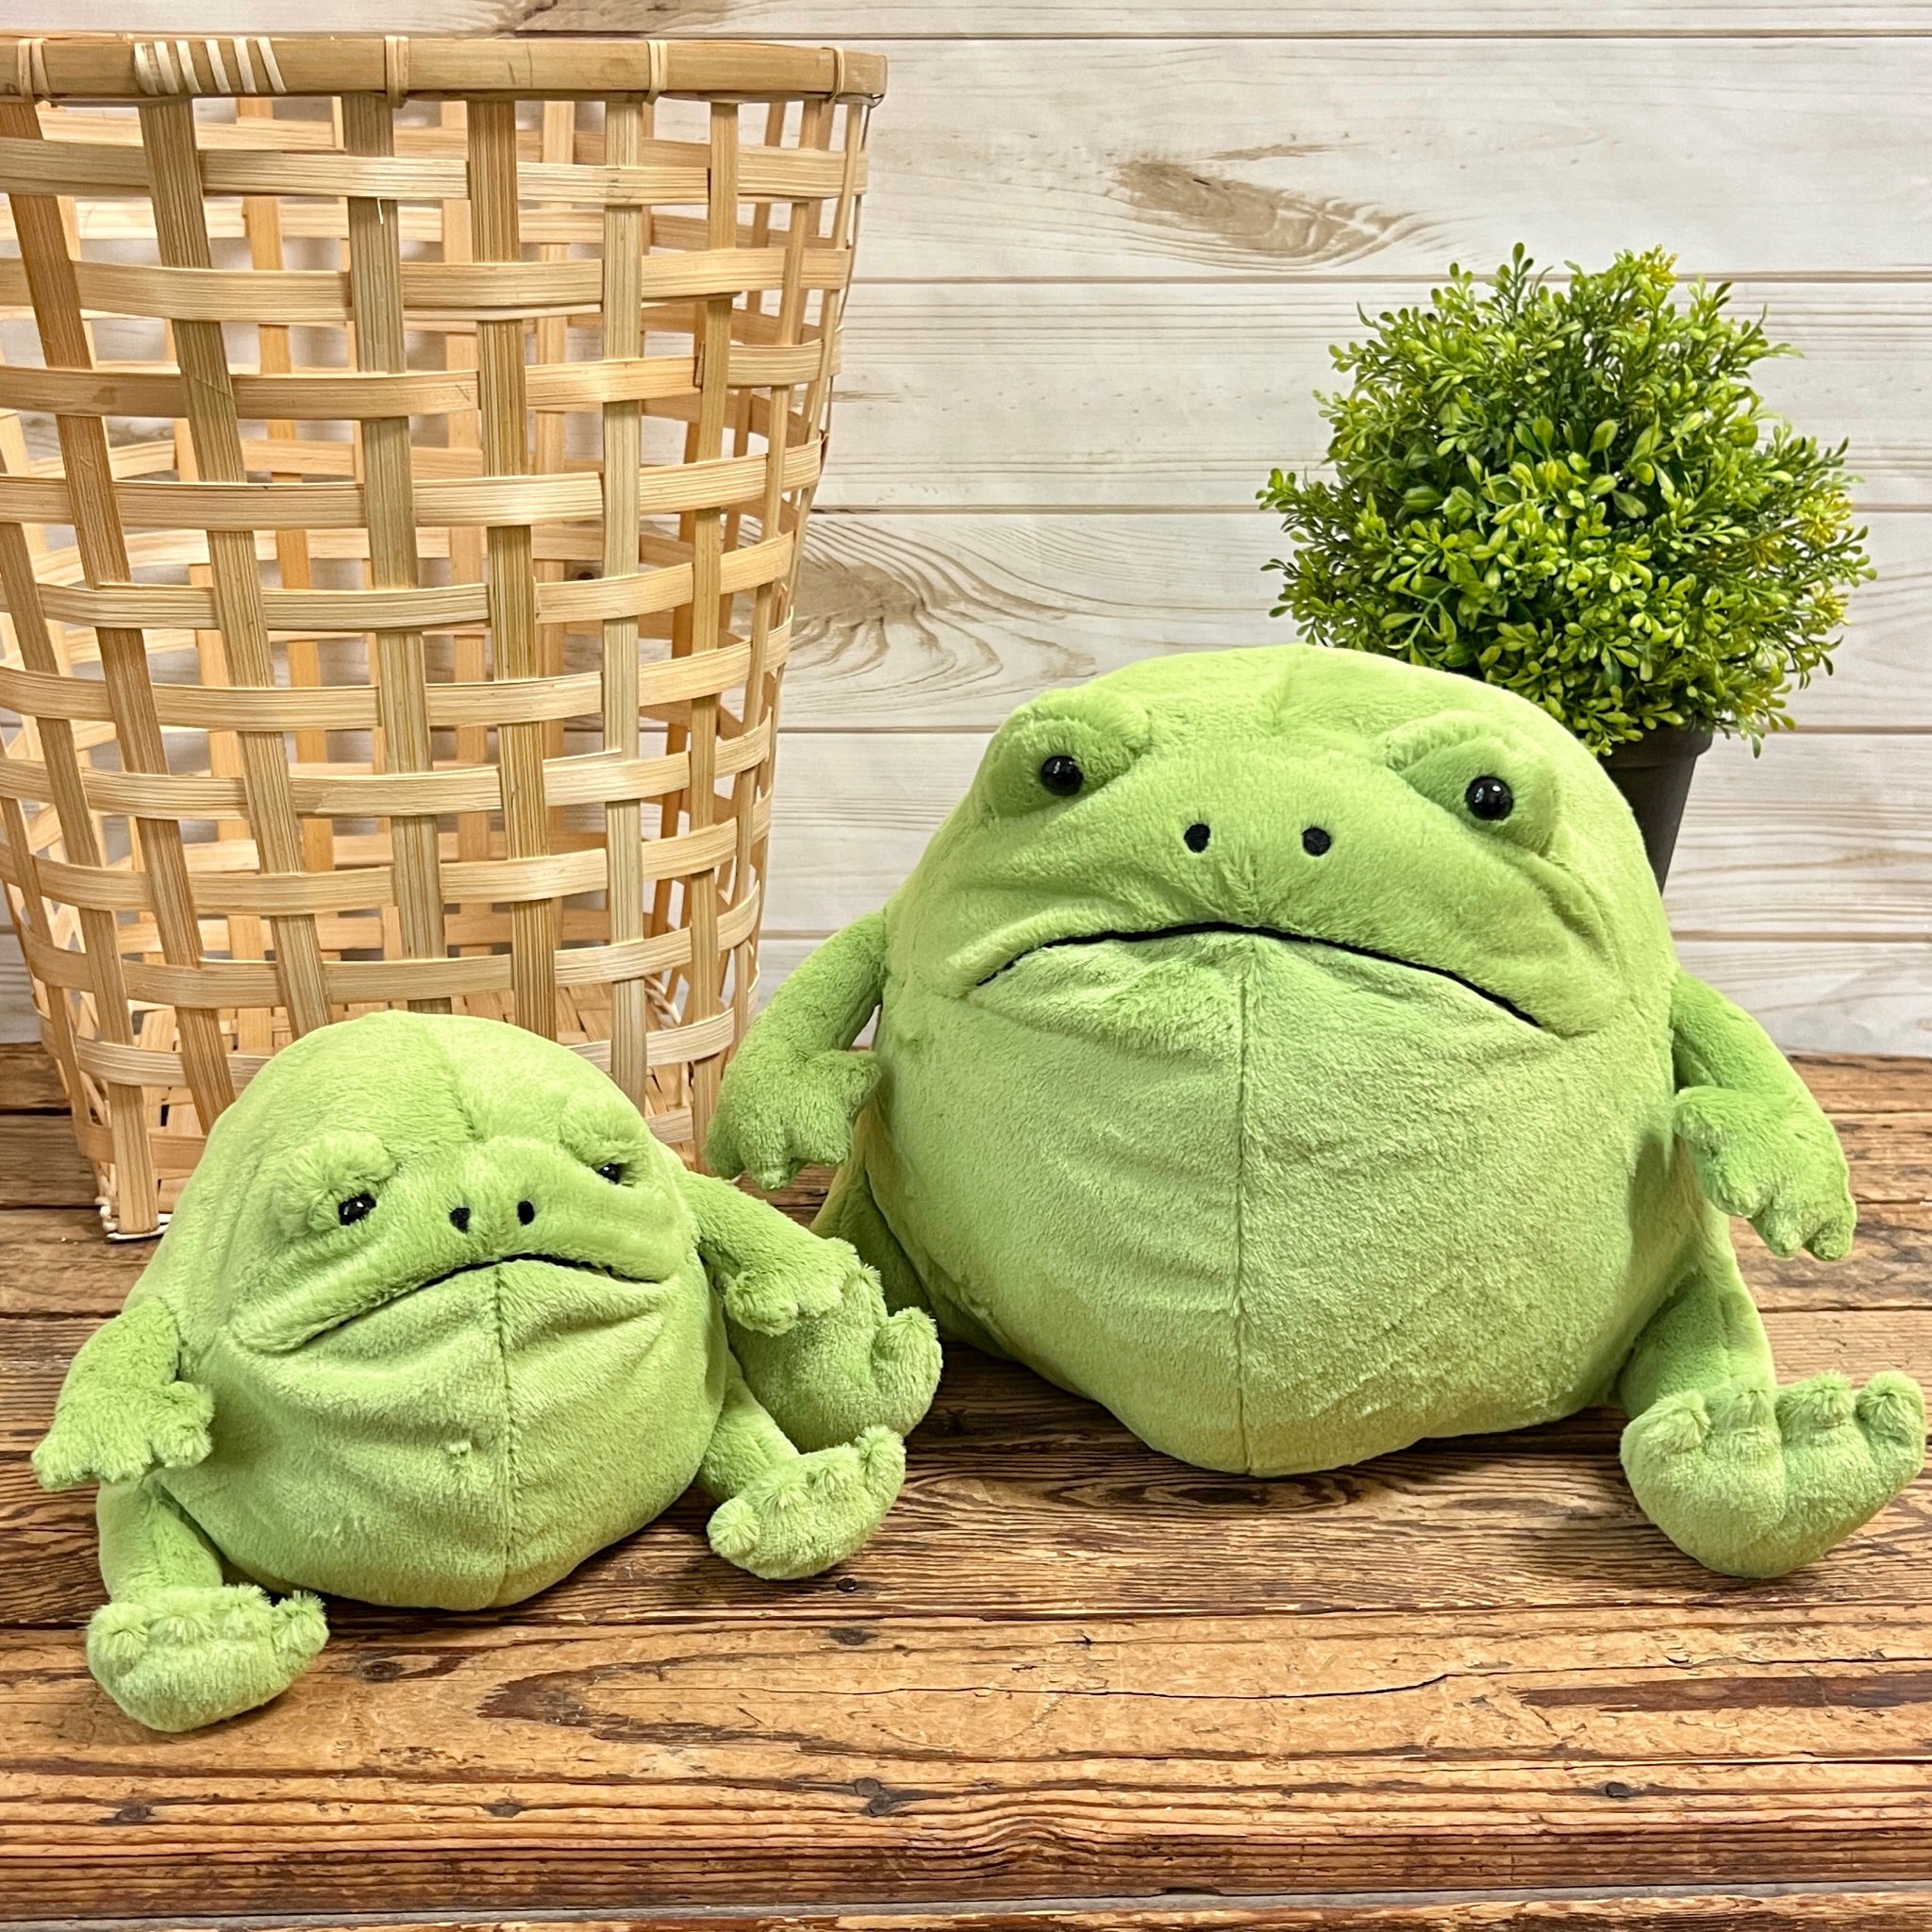 Jellycat Wild Thing Frog - 3 inch - Wild Thing Frog . Buy Frog